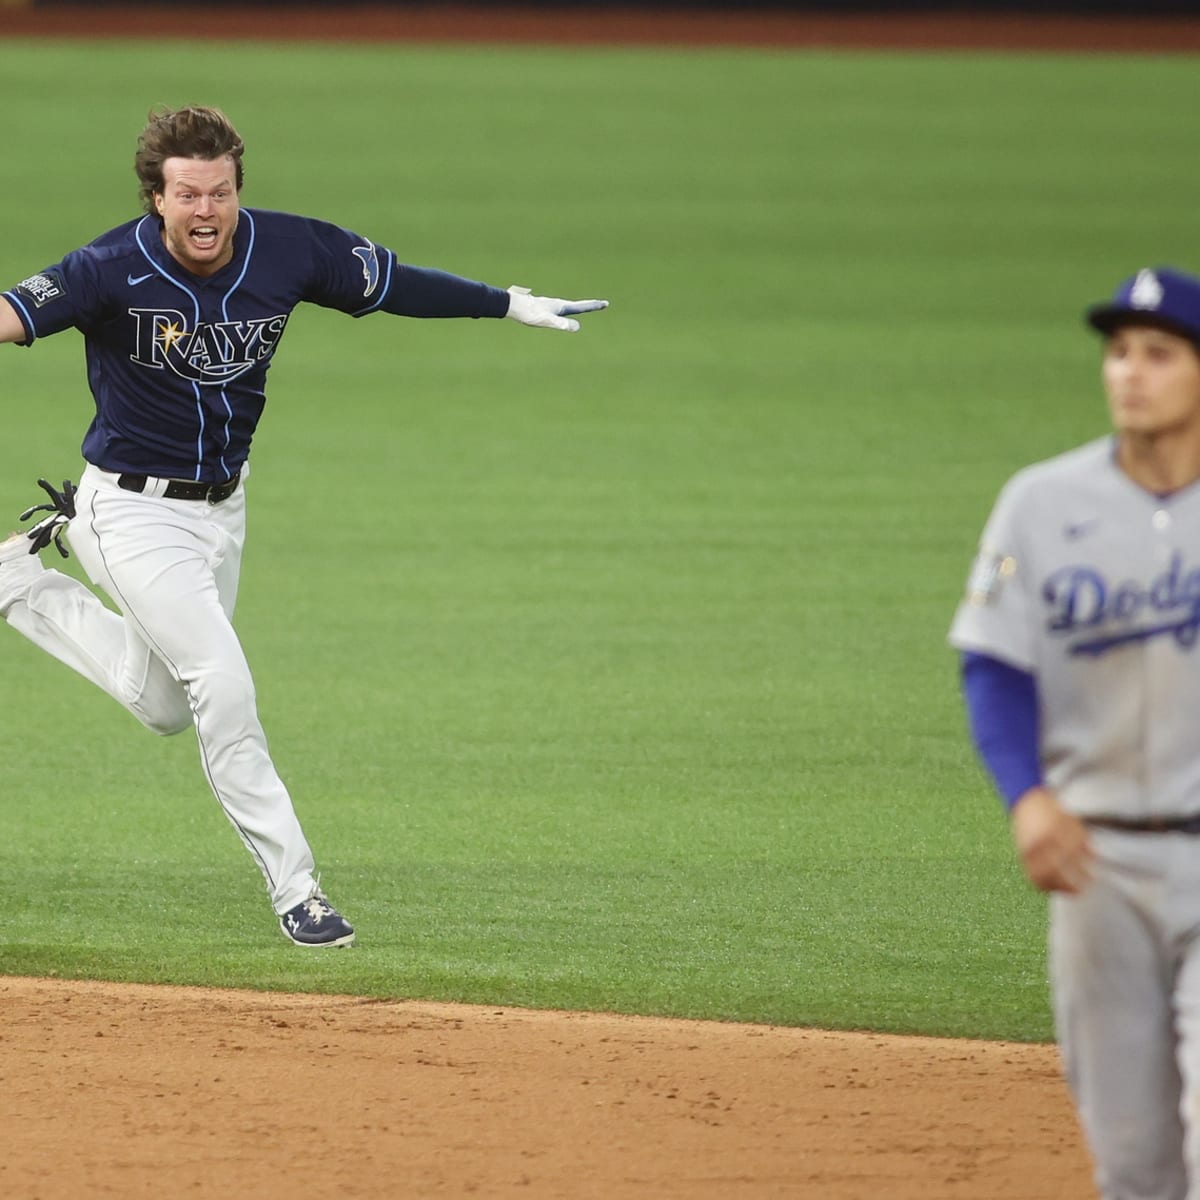 World Series has been both draining, exhilarating for Dodgers fans